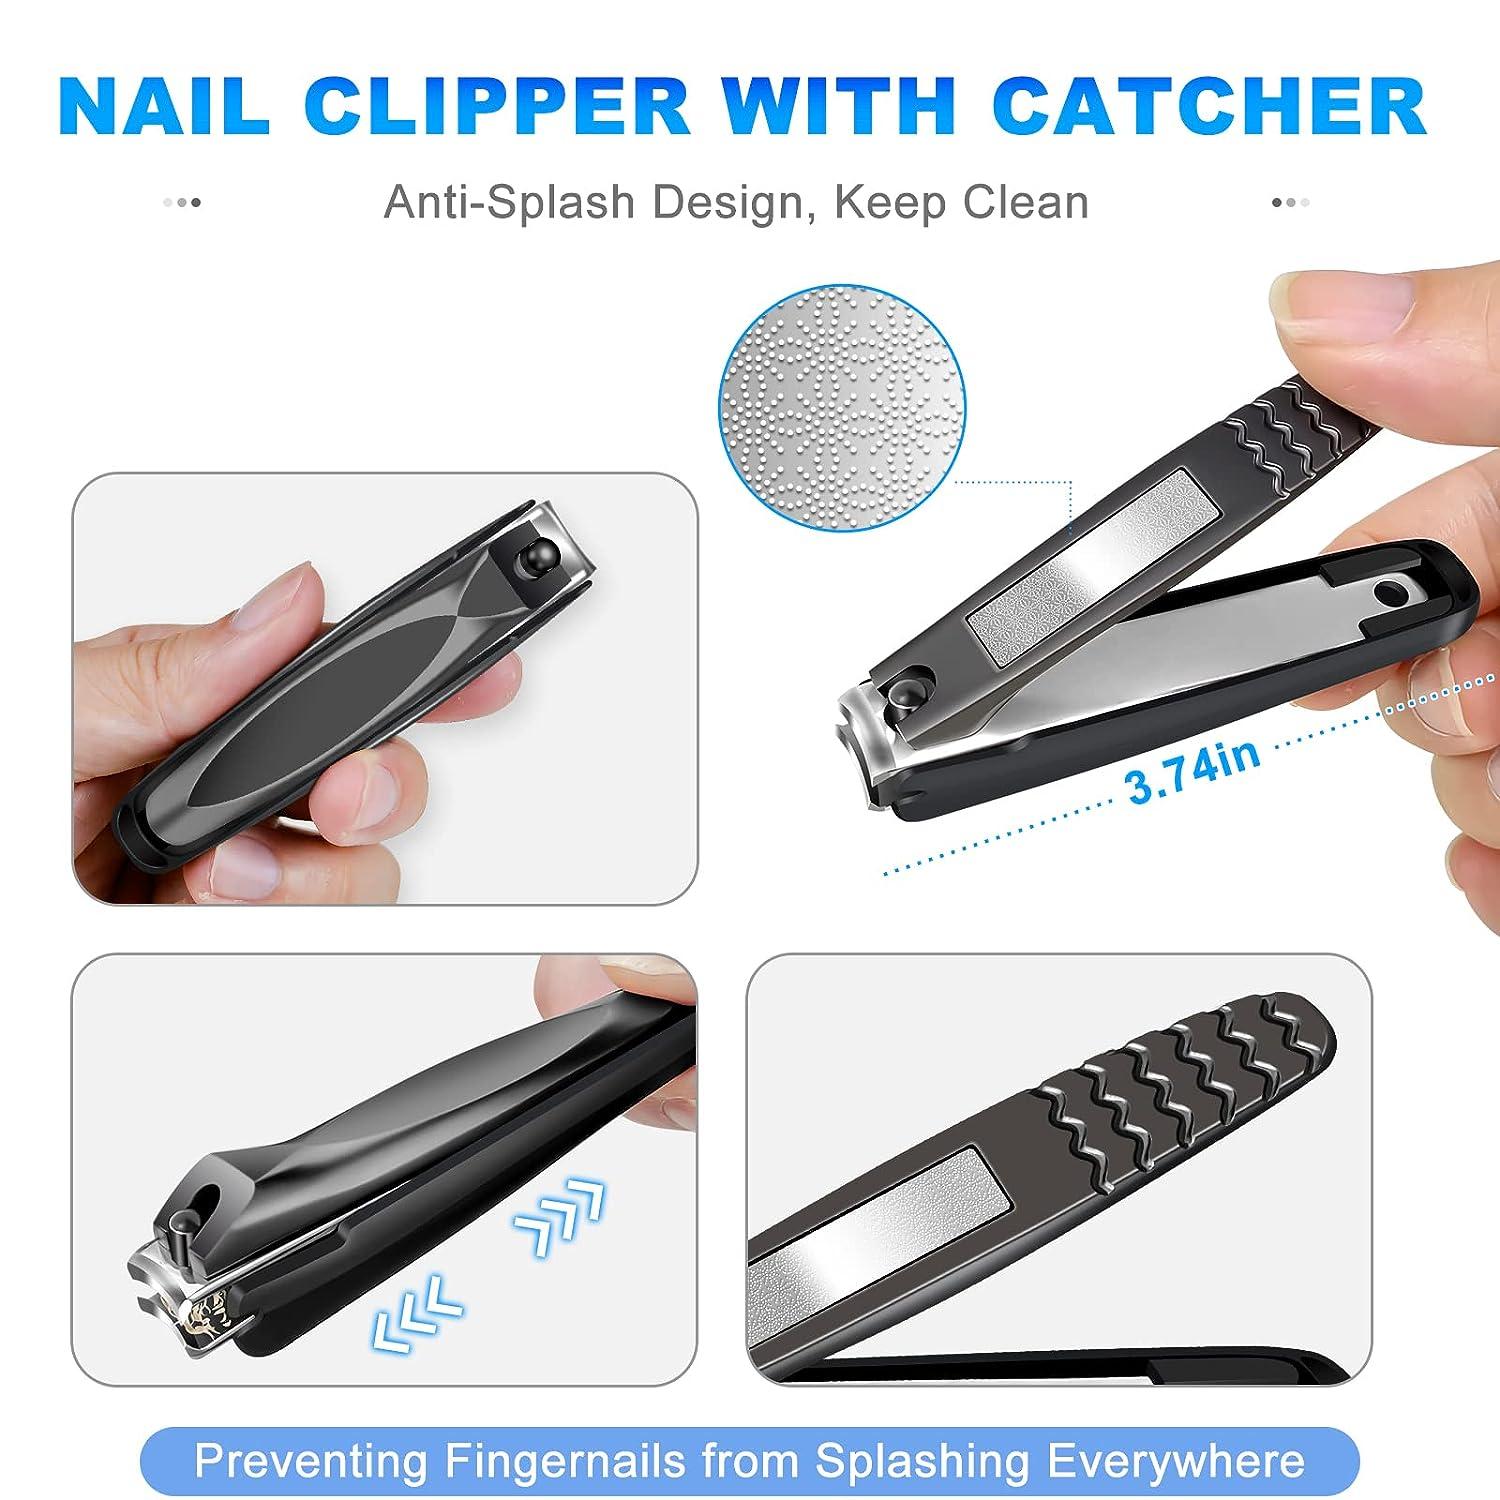 Toenail Clippers for Seniors Thick Nails - Wide Jaw Opening Extra Large Toe  Nail Clippers with Catcher, Professional Sharp Curved Blade Heavy Duty